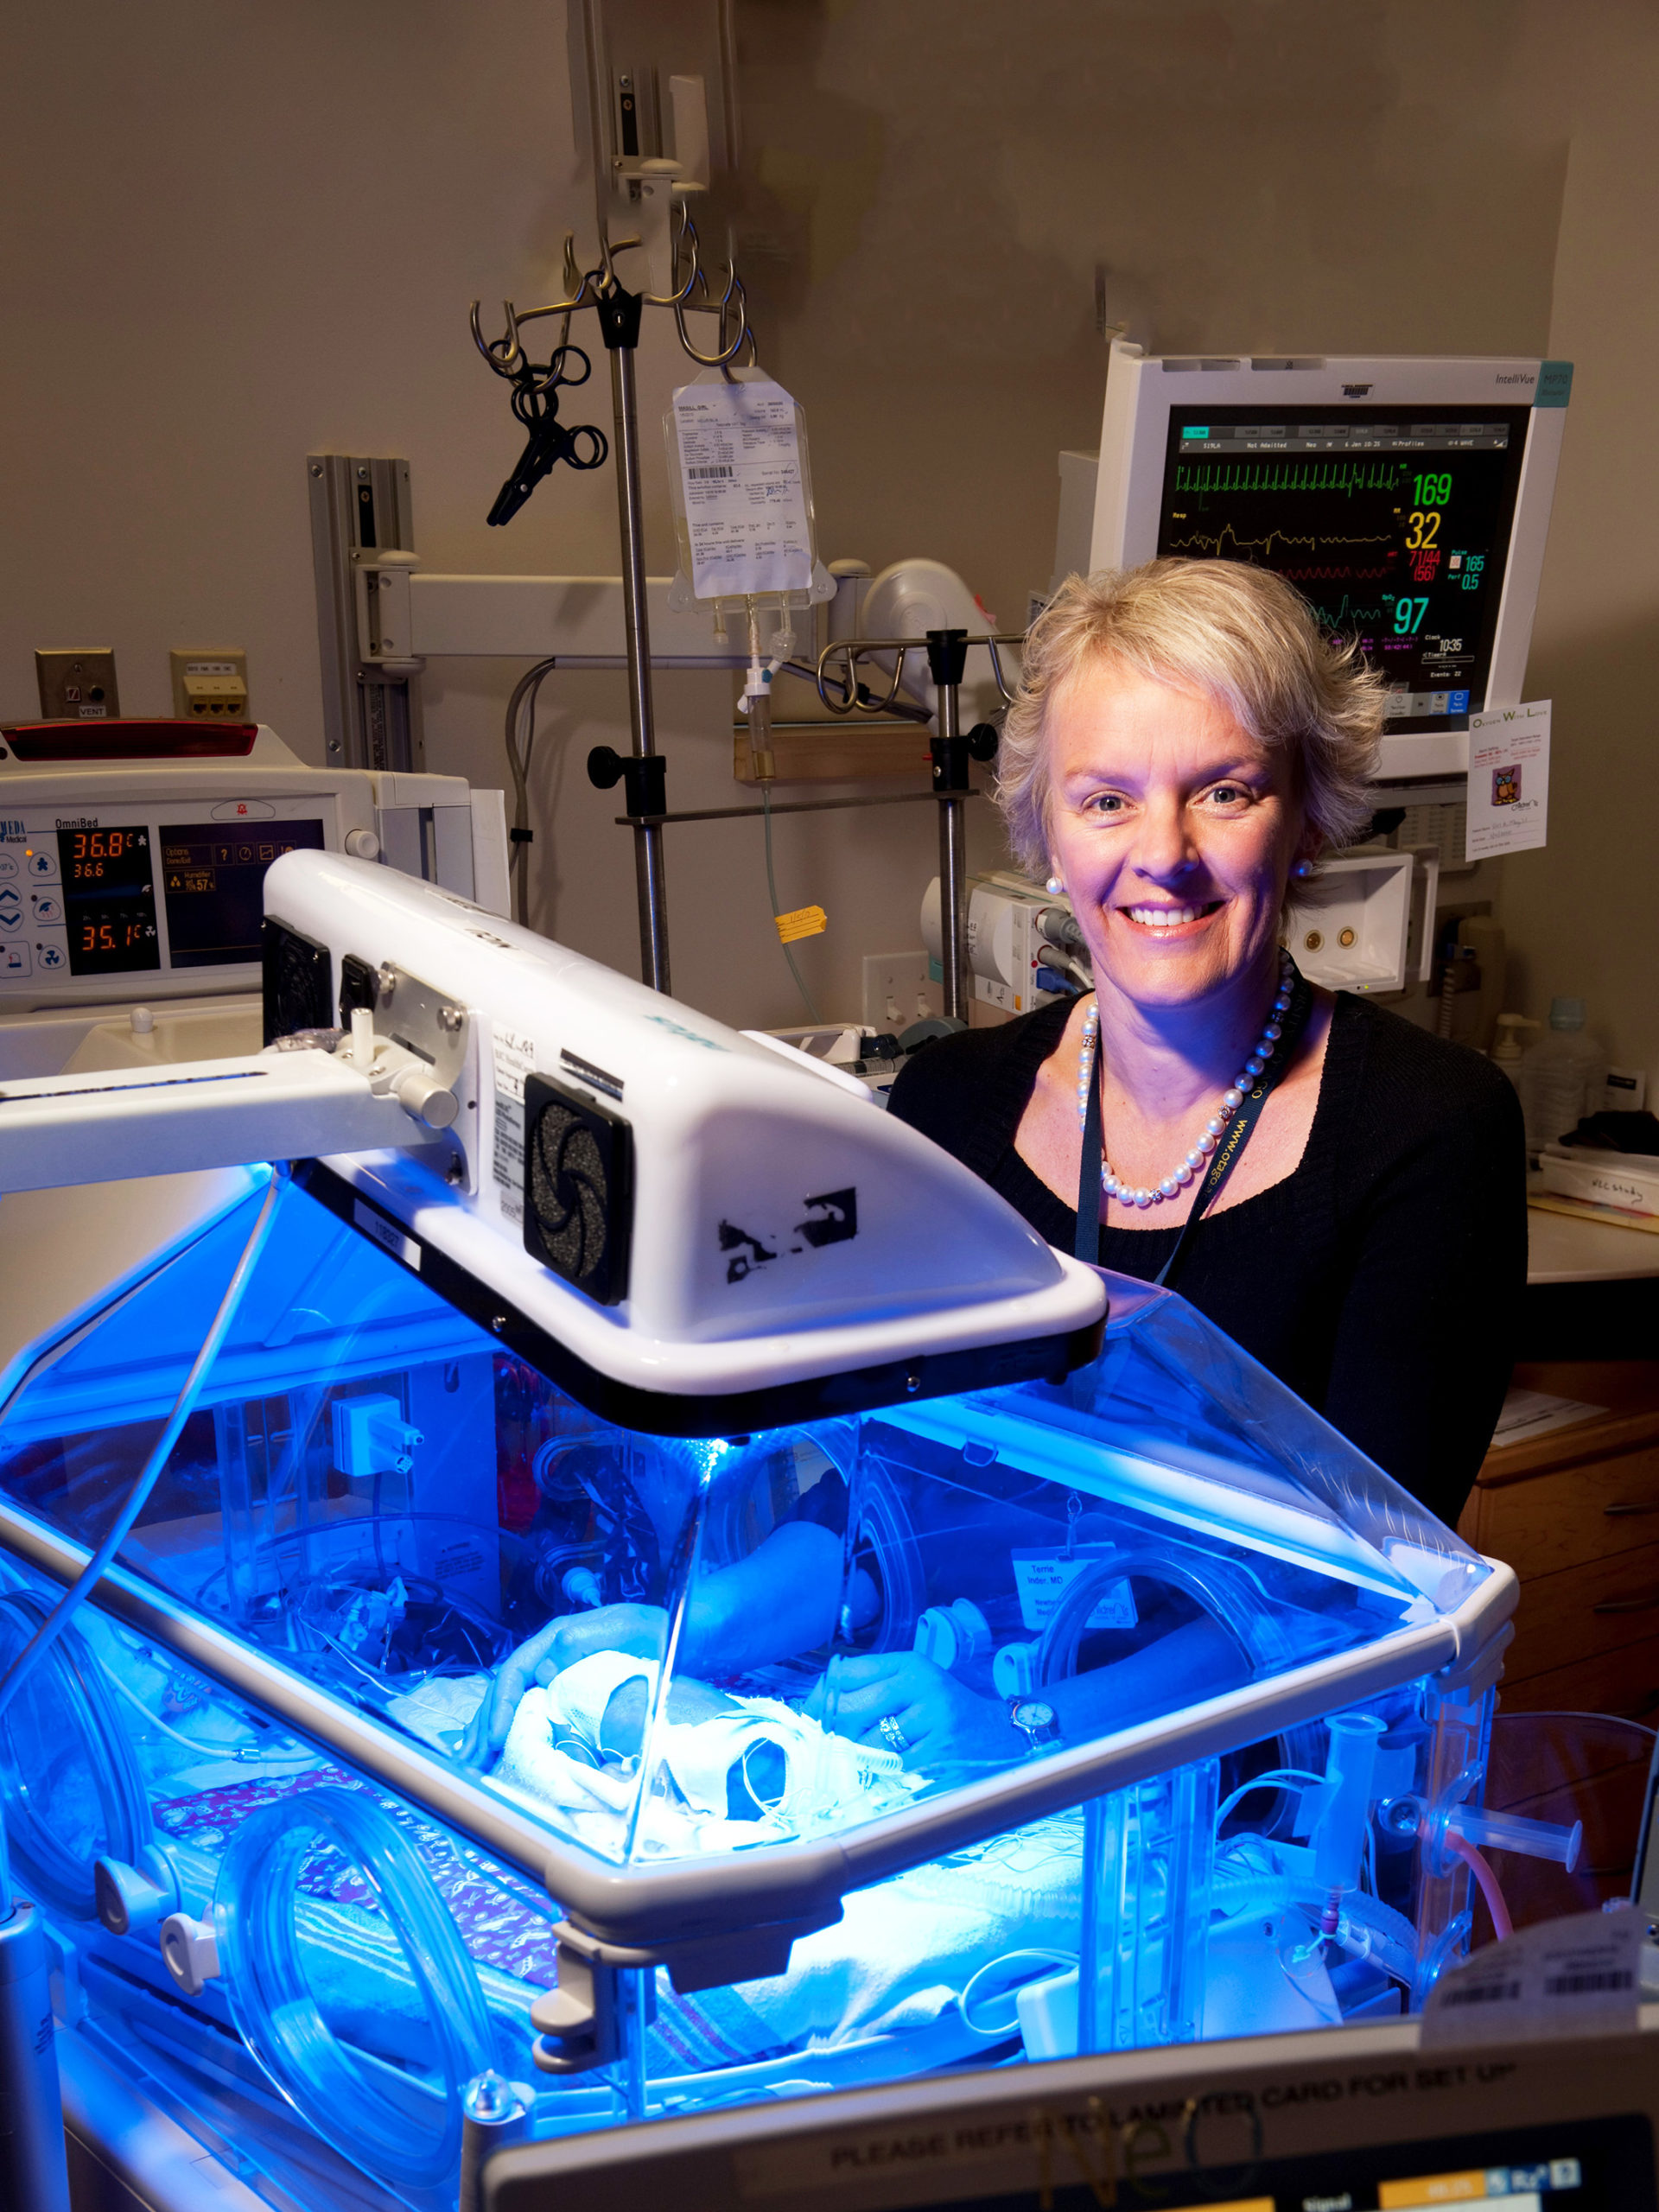 Dr. Terrie Inder, incoming chair of Center of Neonatal Research at CHOC, is used to blazing trails